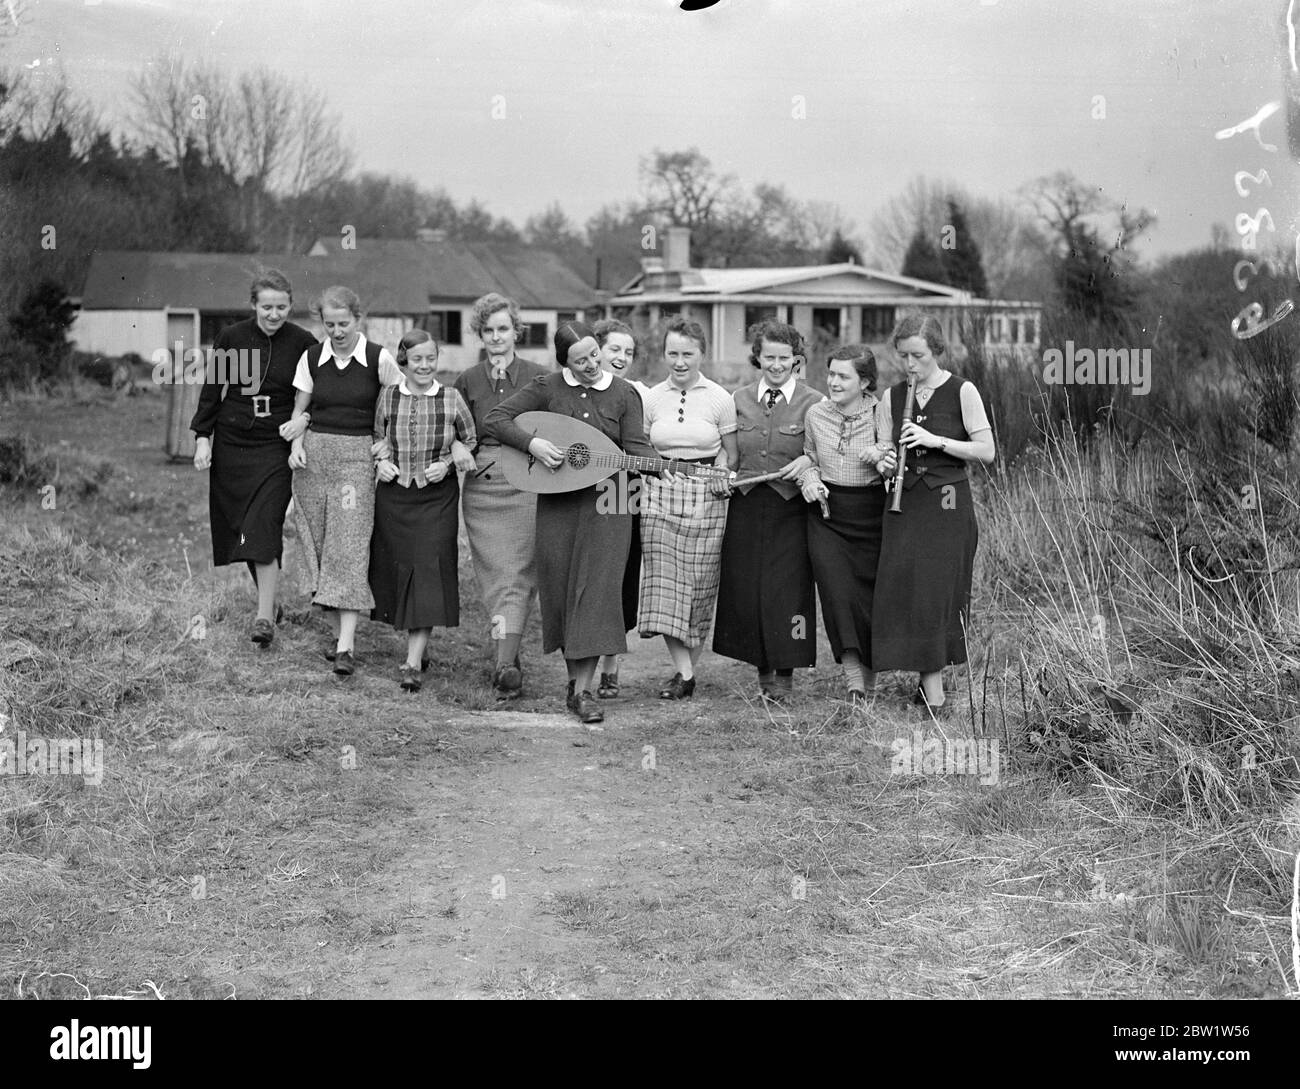 Fräuleins in the New Forest good will camp at Godshill. Girl members of the Hitler Youth Movement - students, clerks and factory hands between the ages of 18 and 25 - are attending a second annual camp organised to promote Anglo - German friendship at Godshill in the New Forest in Hampshire. They are to entertain a party of English girls over the weekend. Young girls from England are attending a similar camp in Germany. Photo shows: the German girls walking in the New Forest with their mandoline. 10 April 1937 Stock Photo